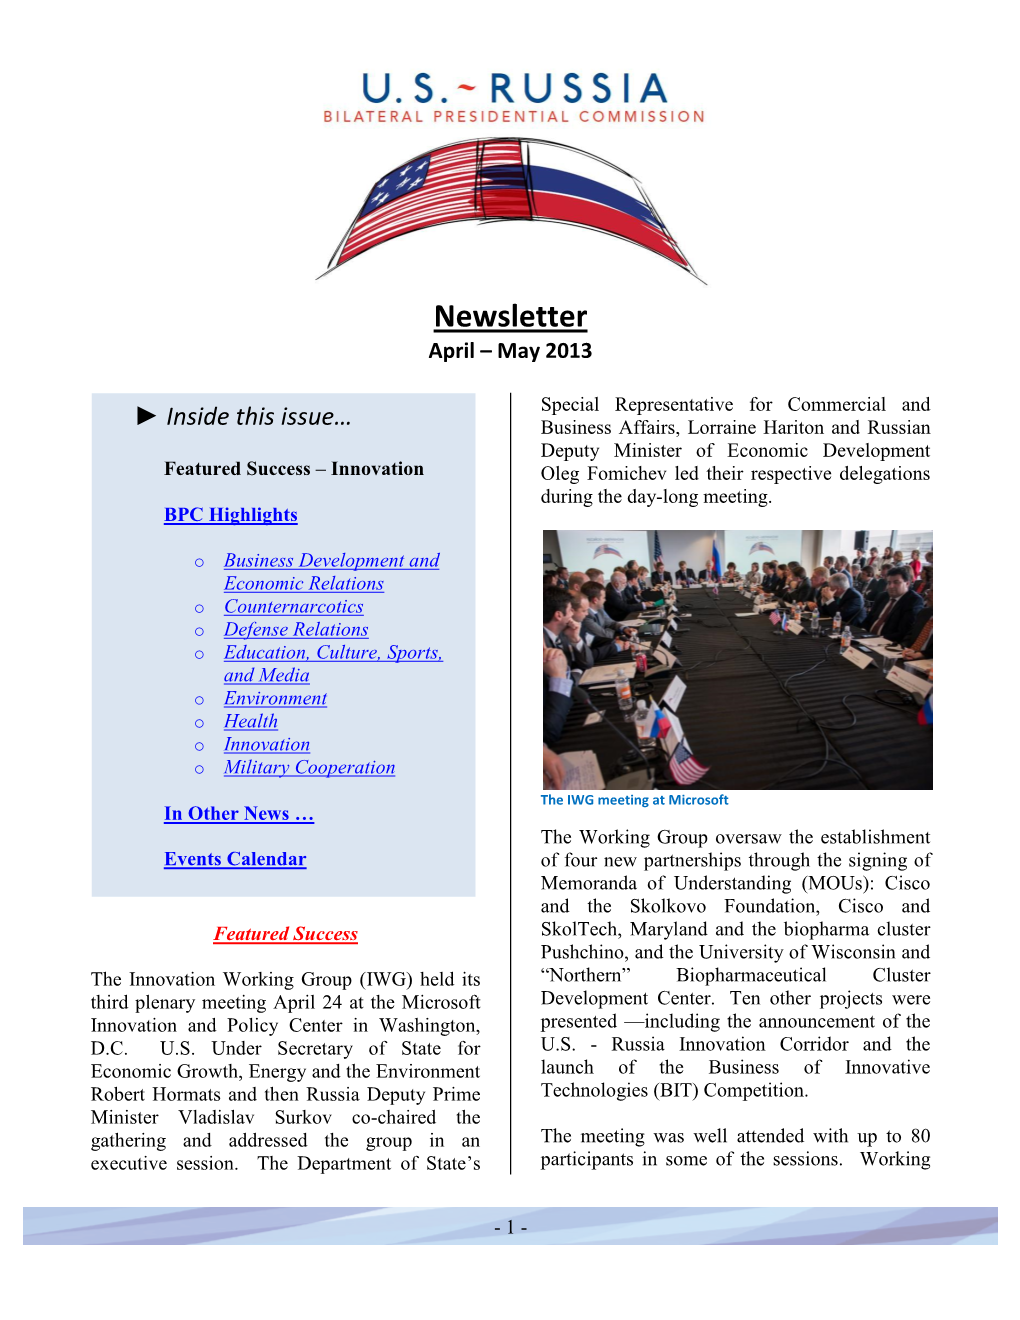 Newsletter April – May 2013